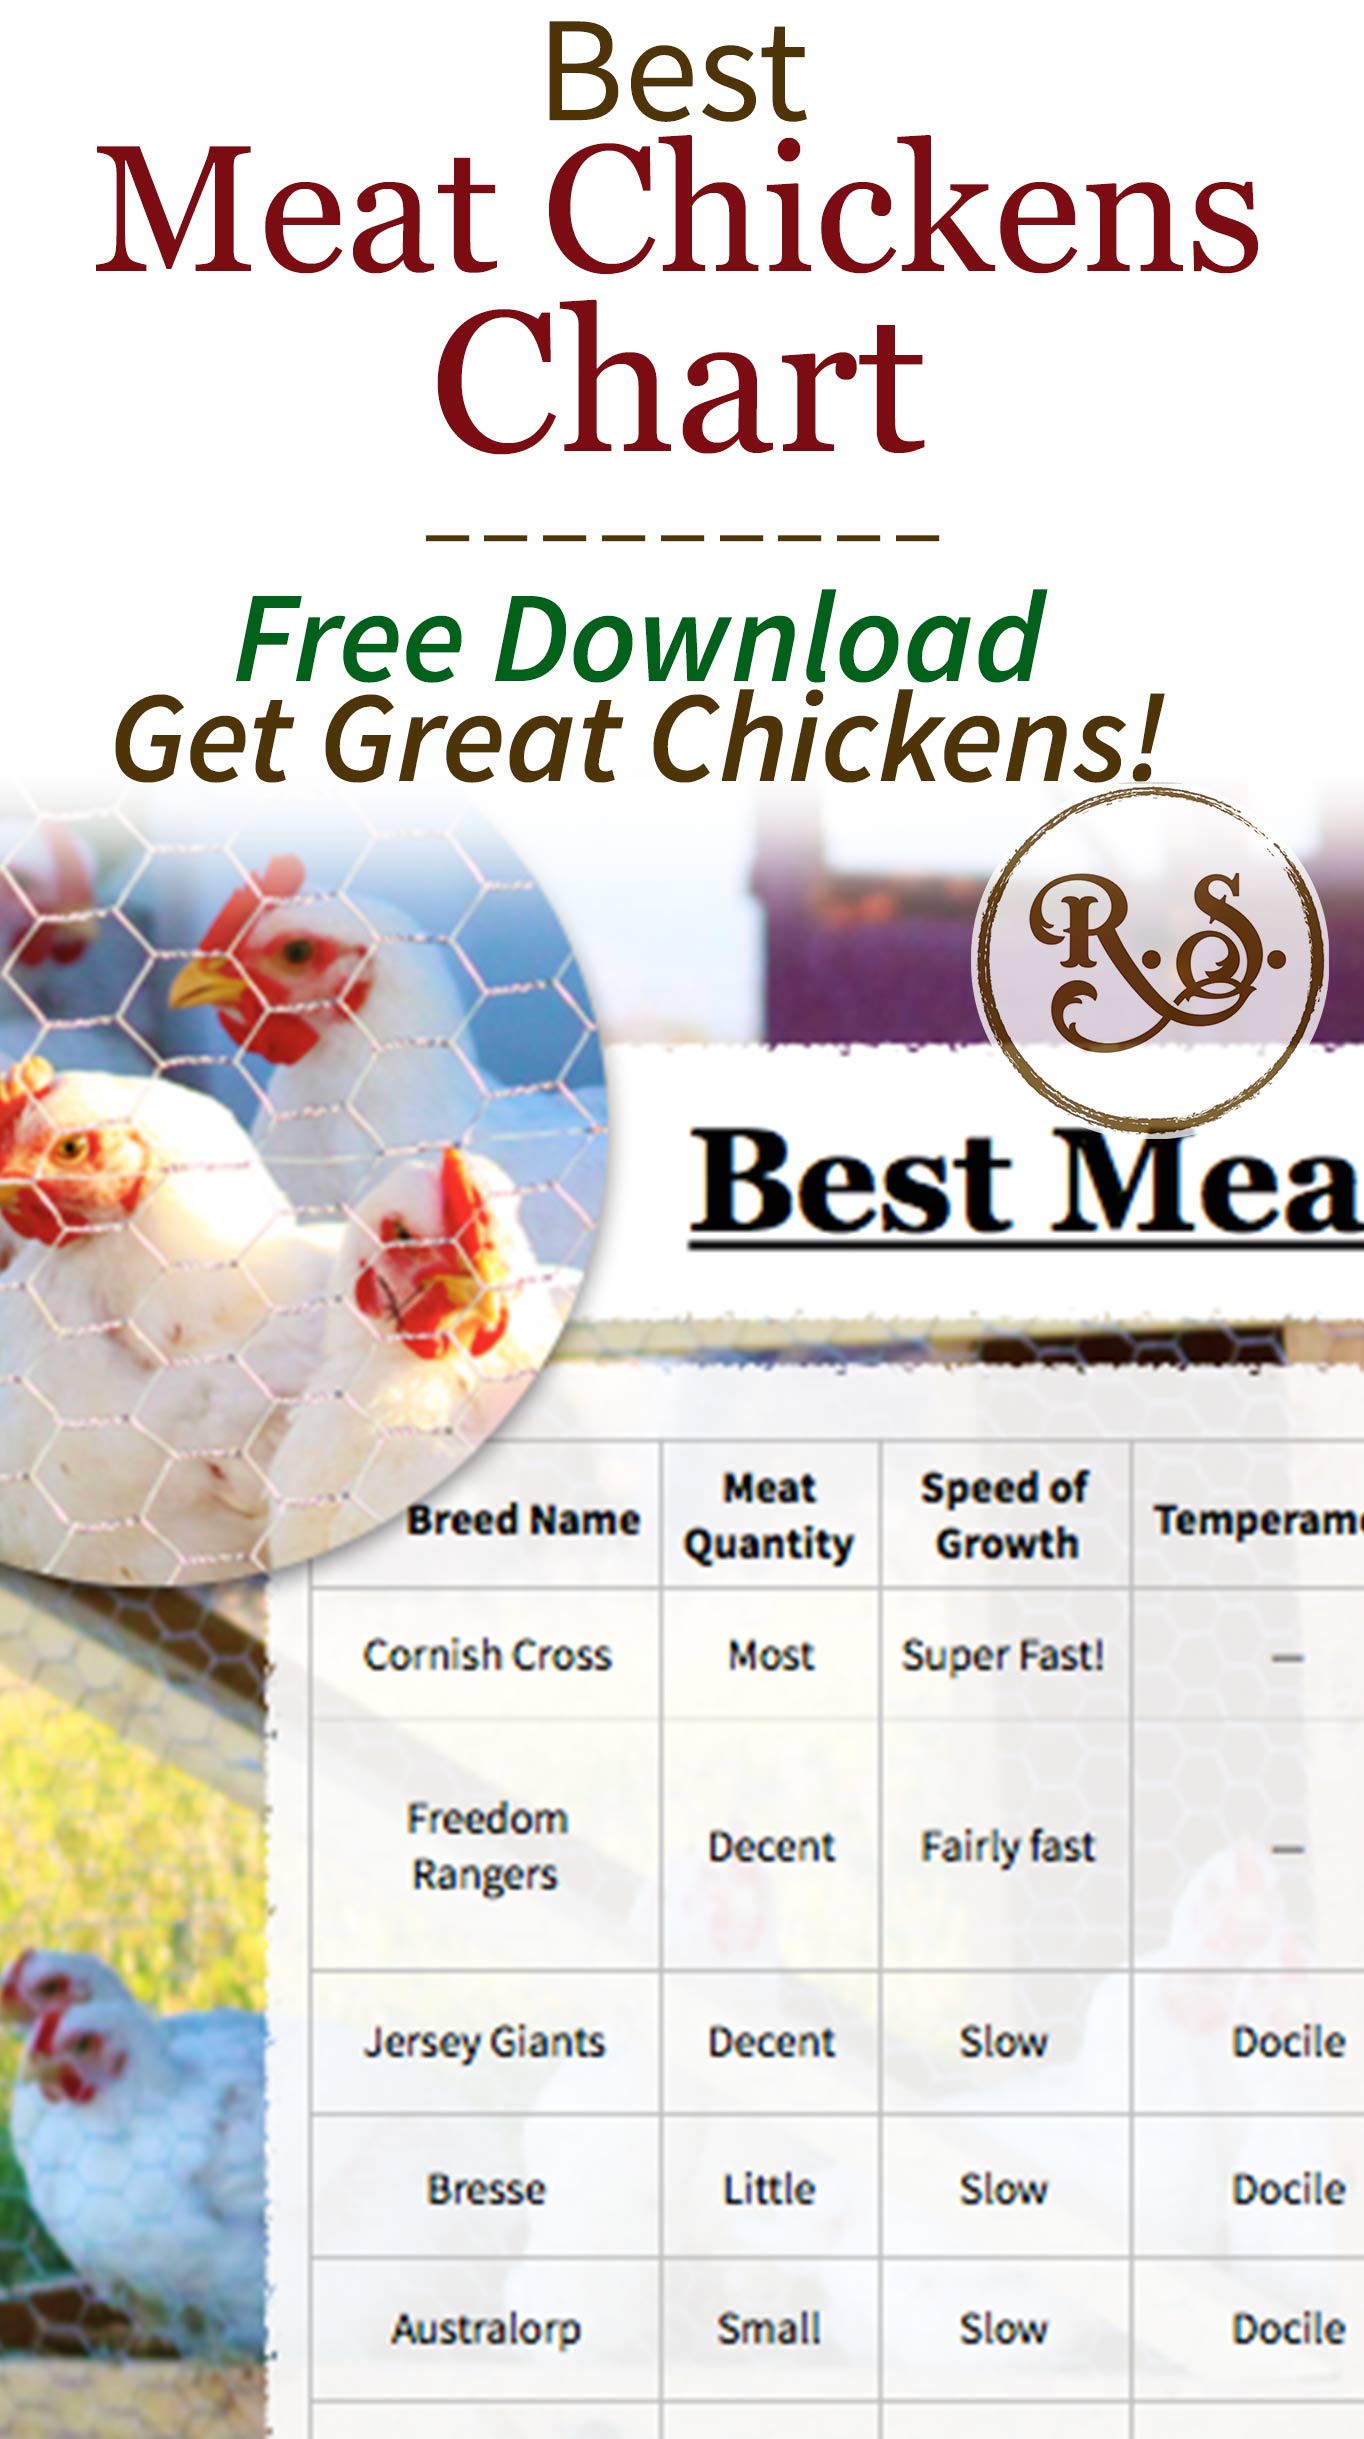 Get your best meat chickens chart! 12 meat chicken breeds which are great for raising on your homestead. Heritage and cross-bred broilers are compared. An instant download you can print out now.